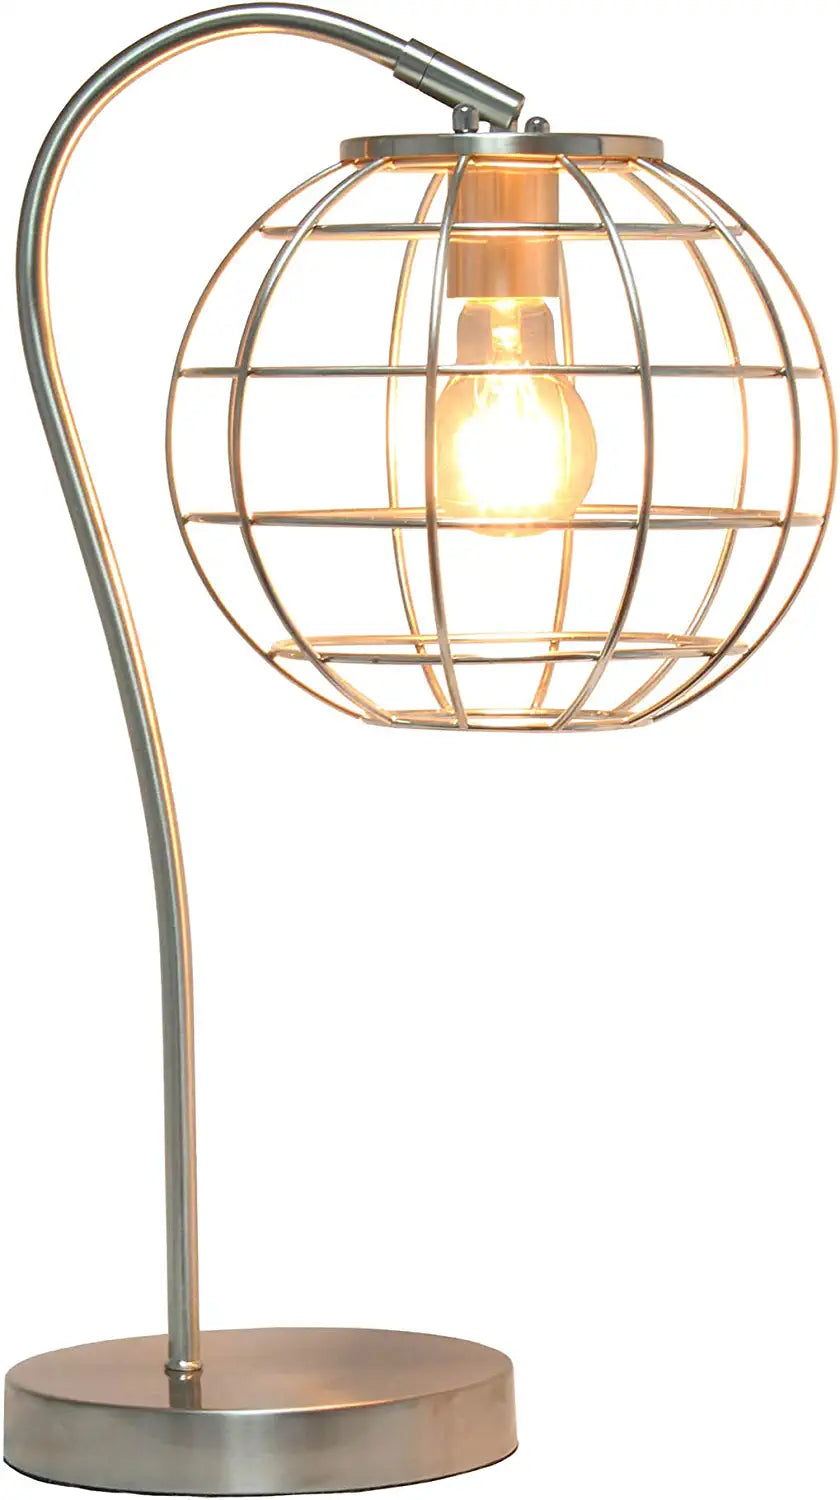 Lalia Home Decorative Arched Metal Cage Table Lamp, Brushed Nickel